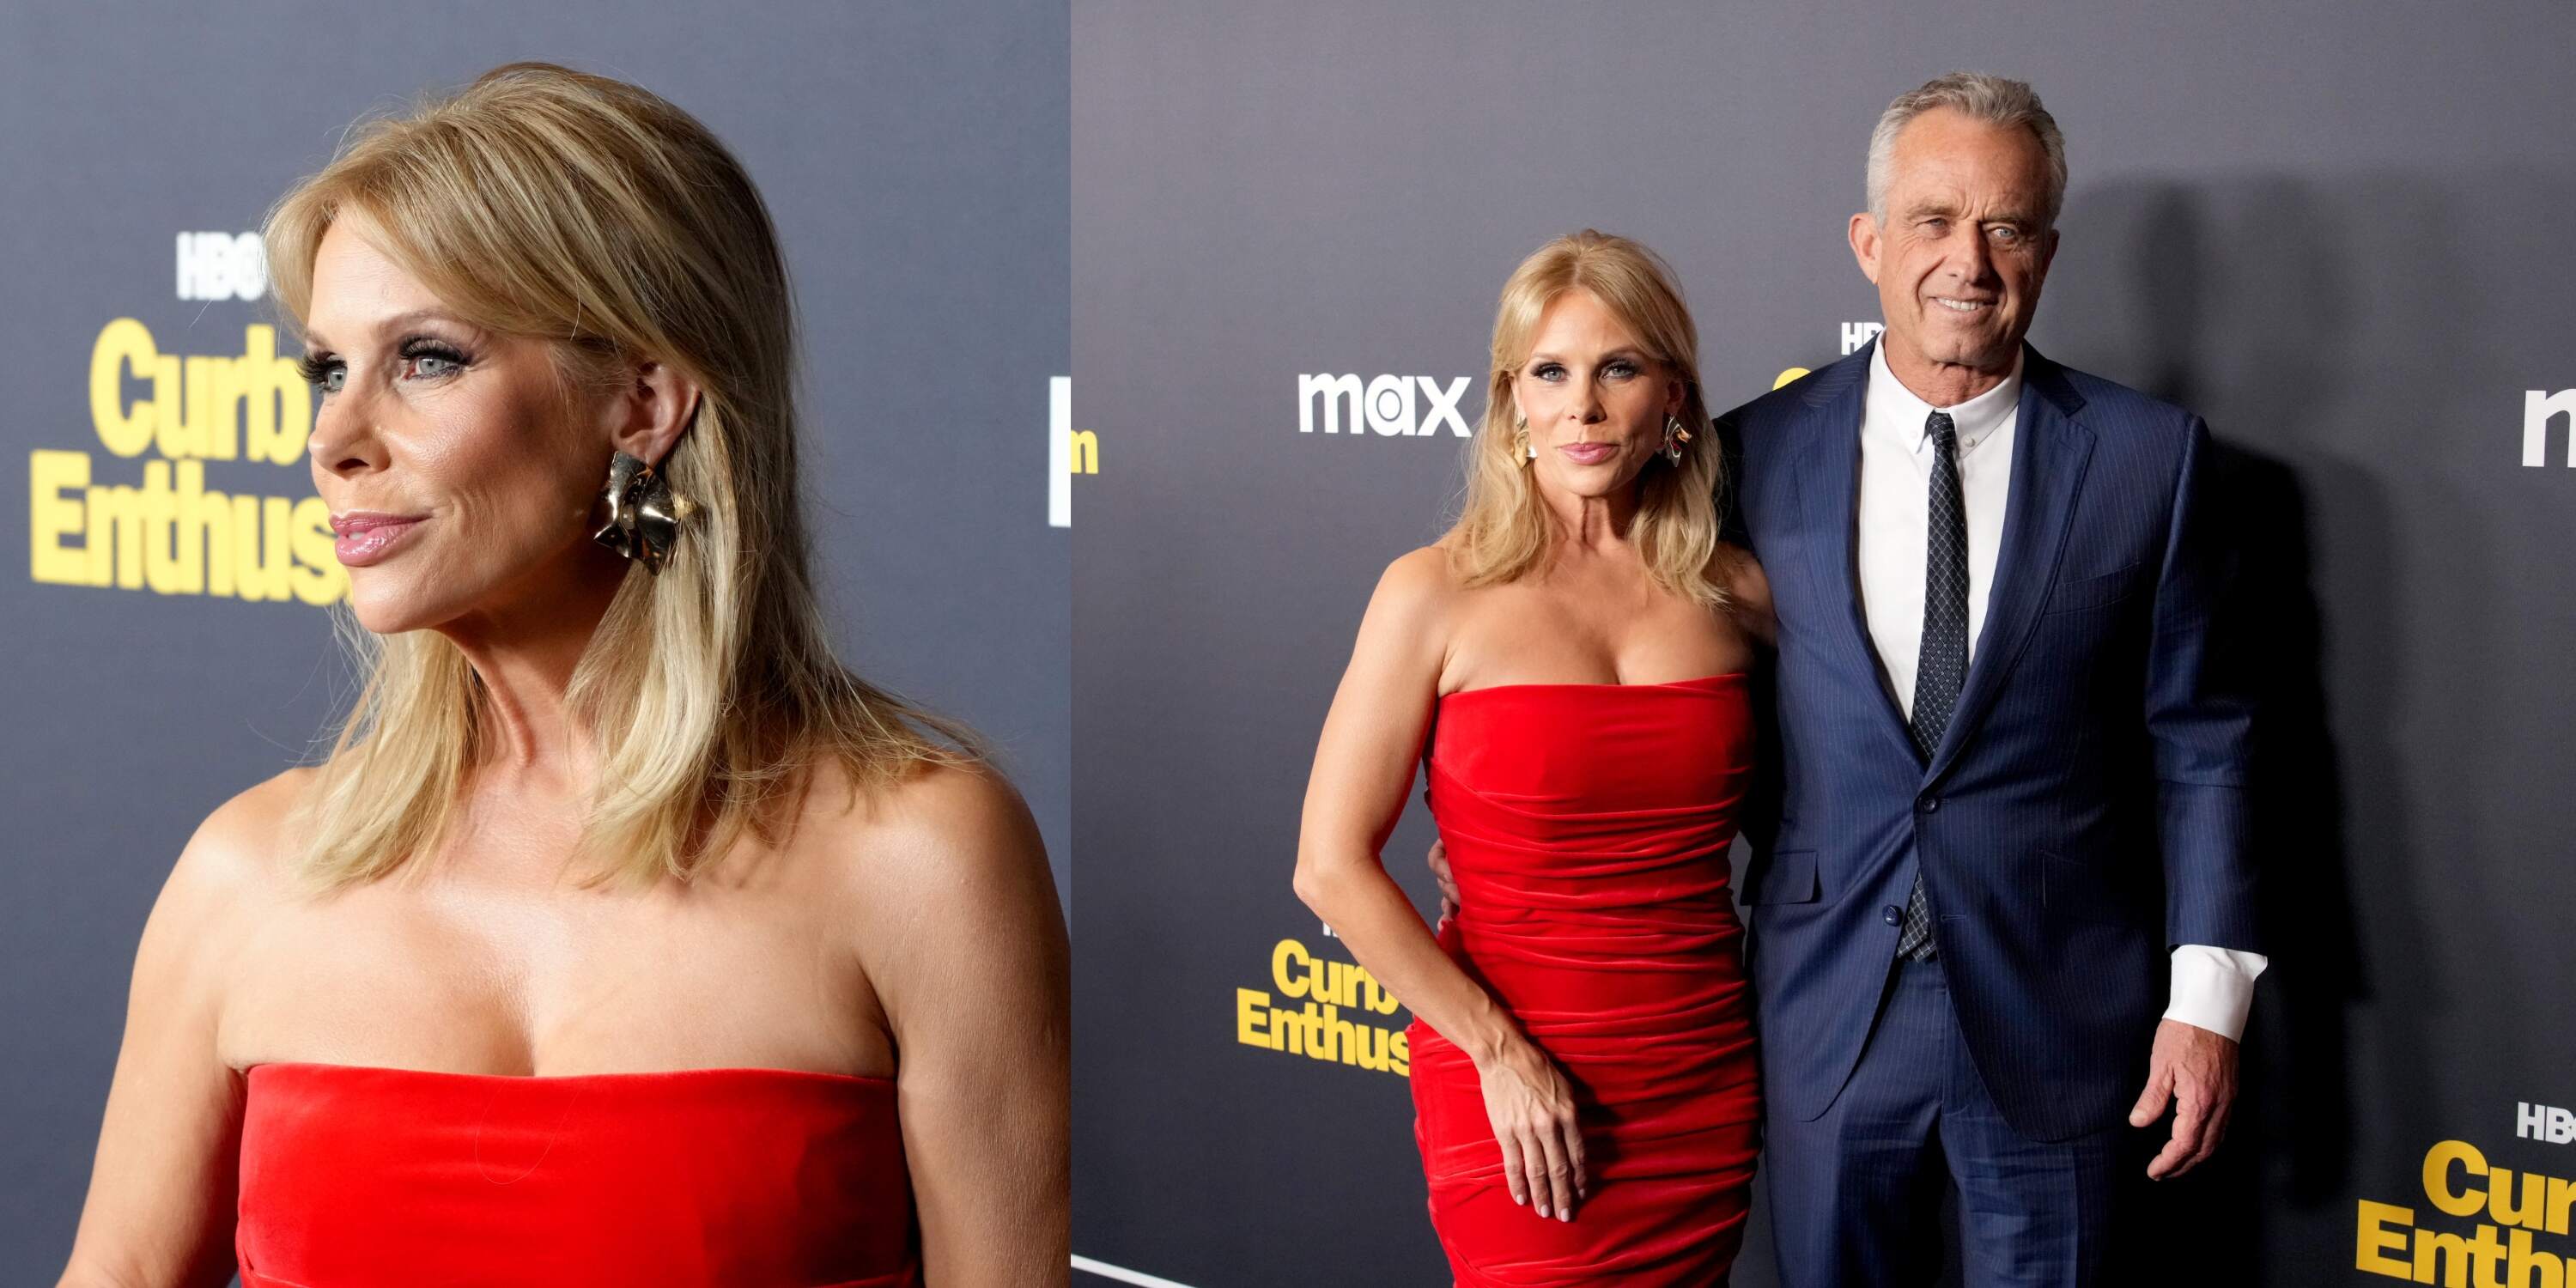 Curb Your Enthusiasm star Cheryl Hines and husband Robert F. Kennedy Jr. hold each other and pose for cameras